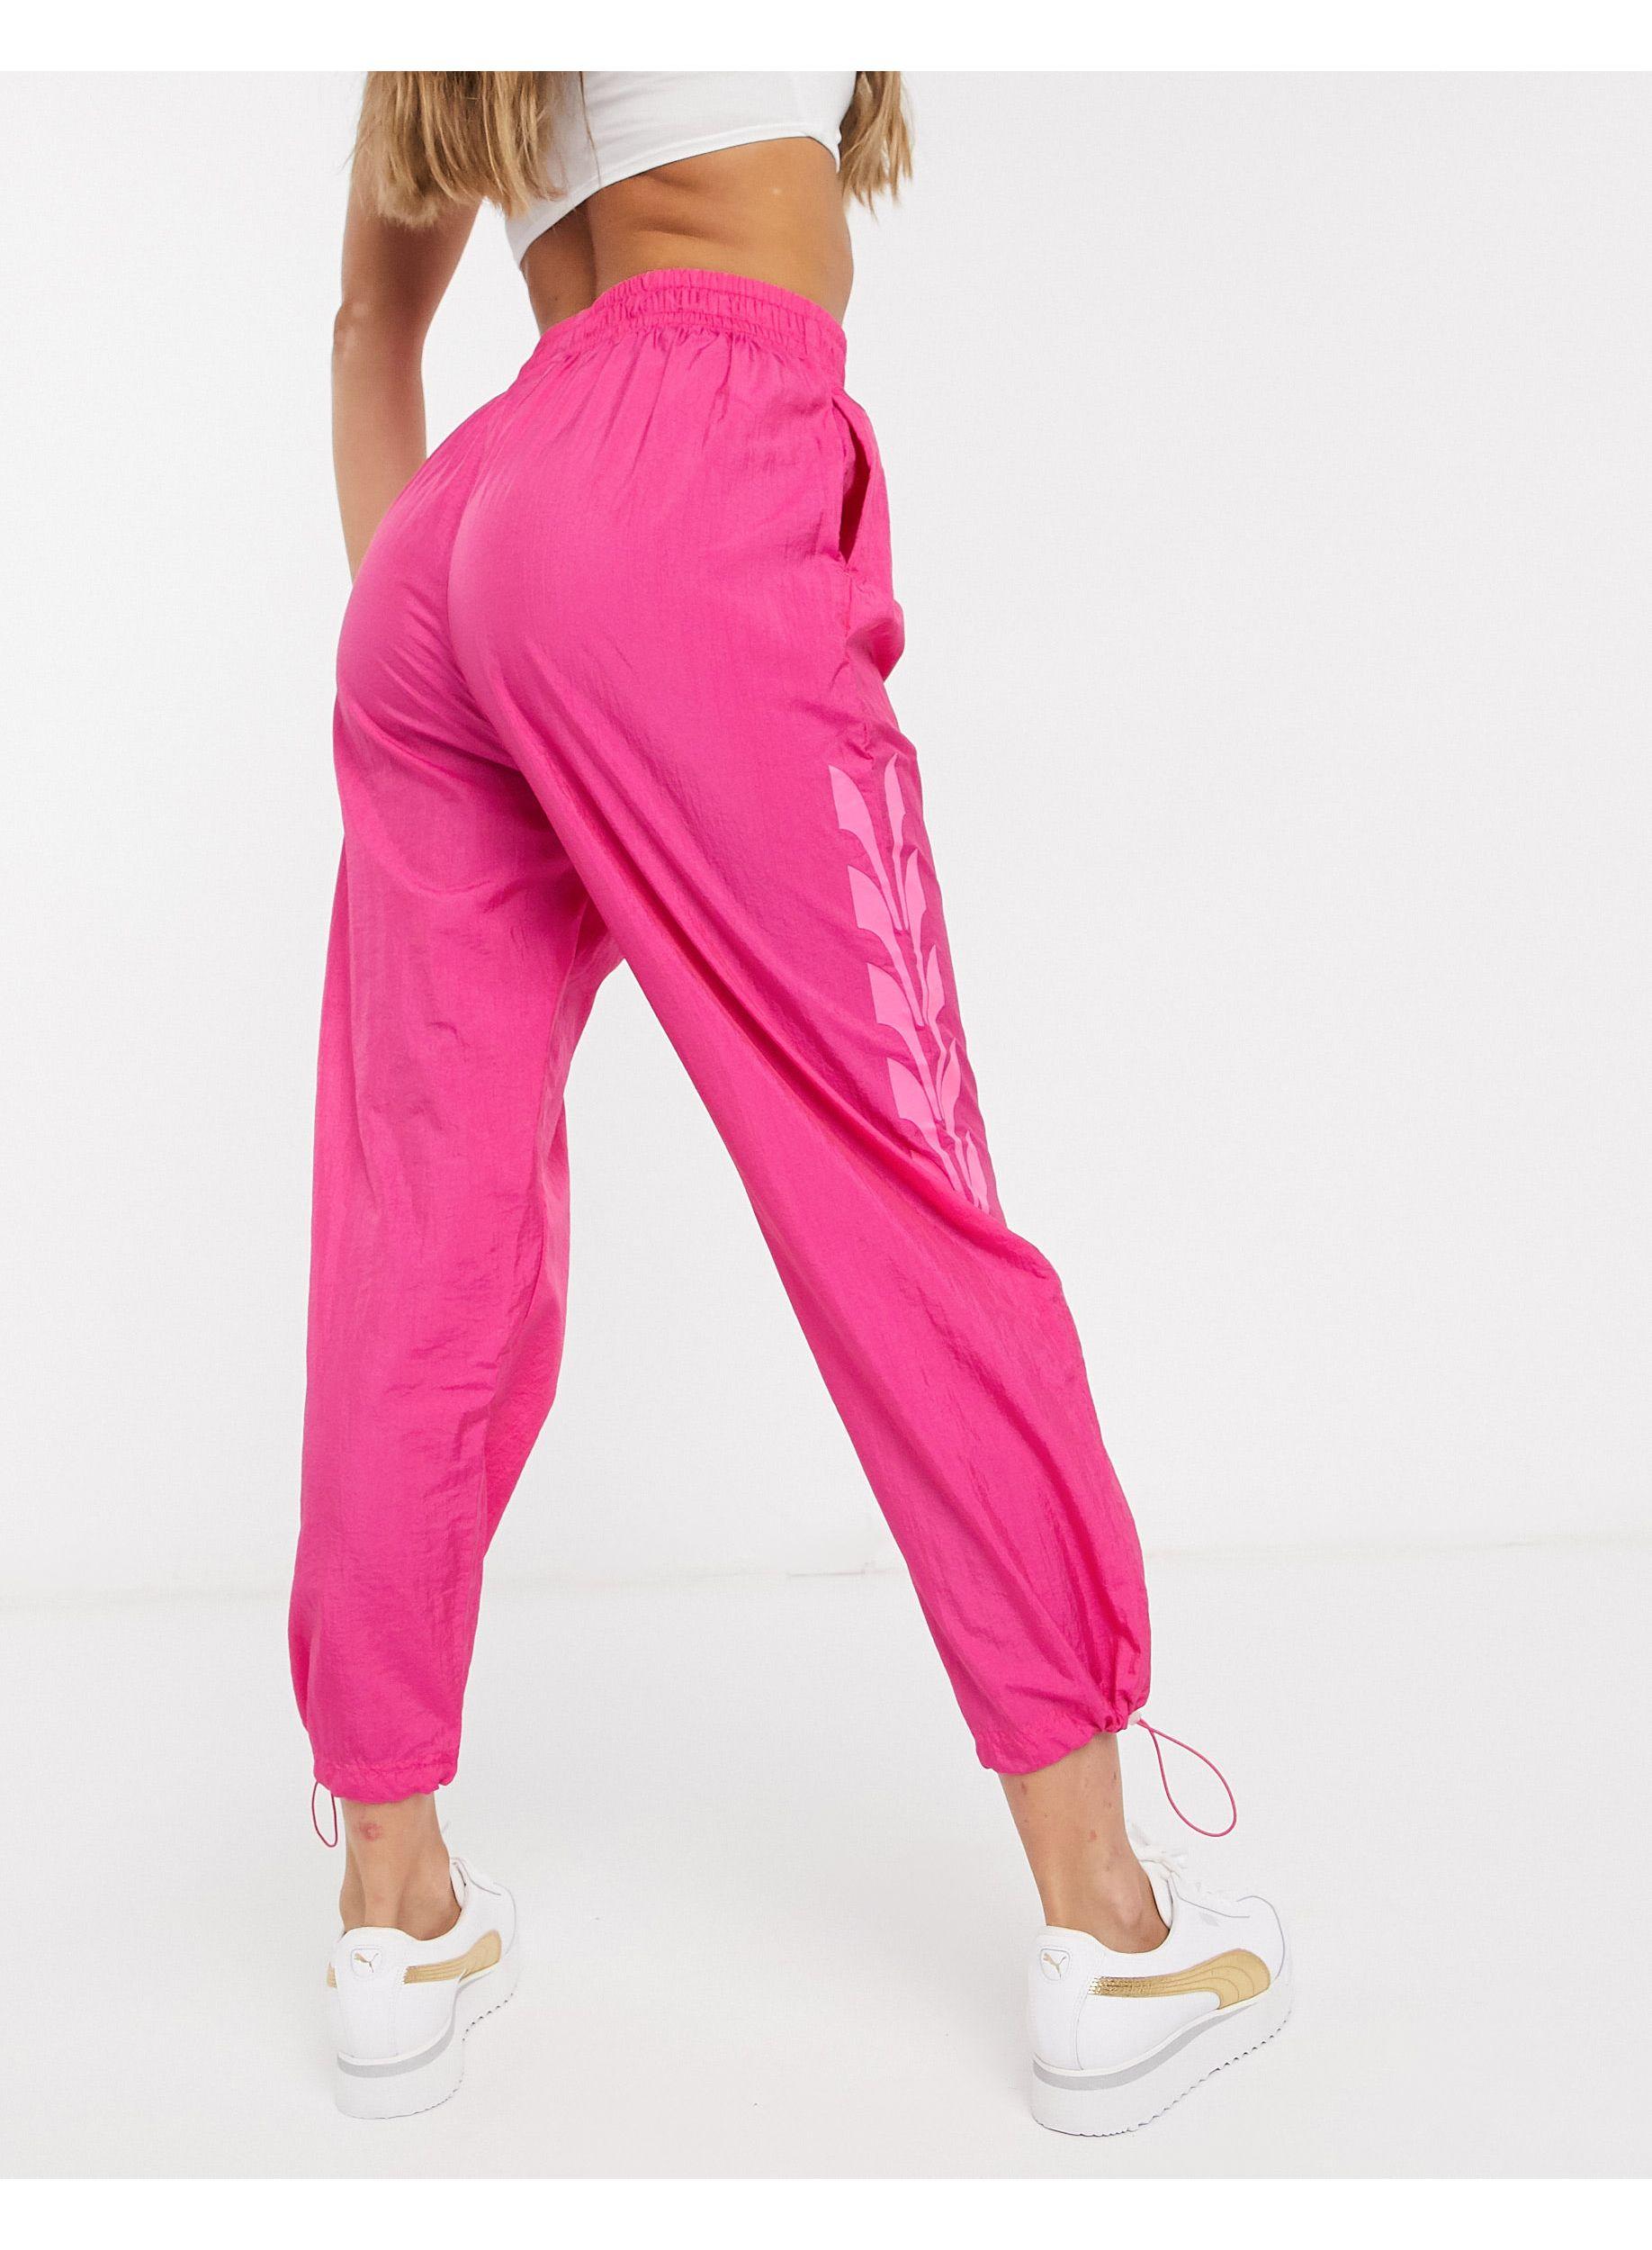 PUMA Evide Track Pants in Pink - Lyst